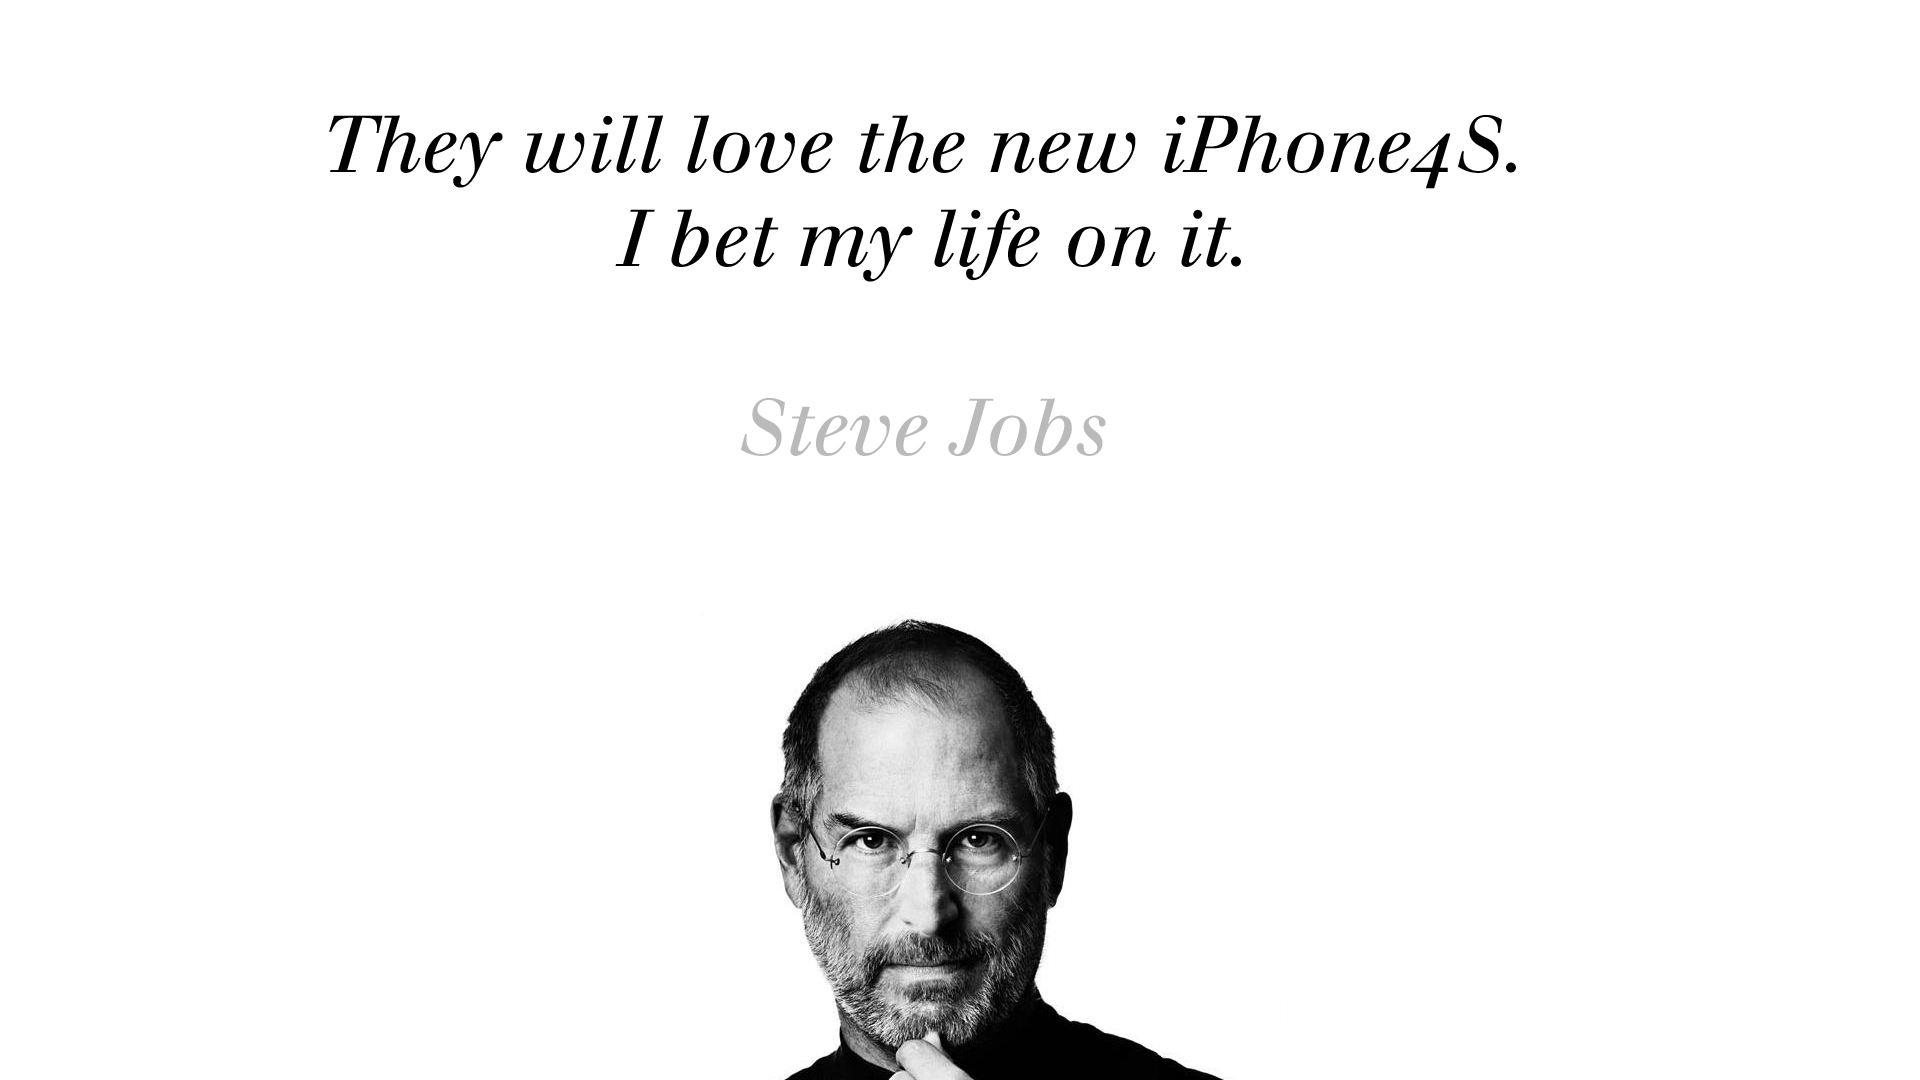 Steve Jobs about iPhone 4S for 1920 x 1080 HDTV 1080p resolution